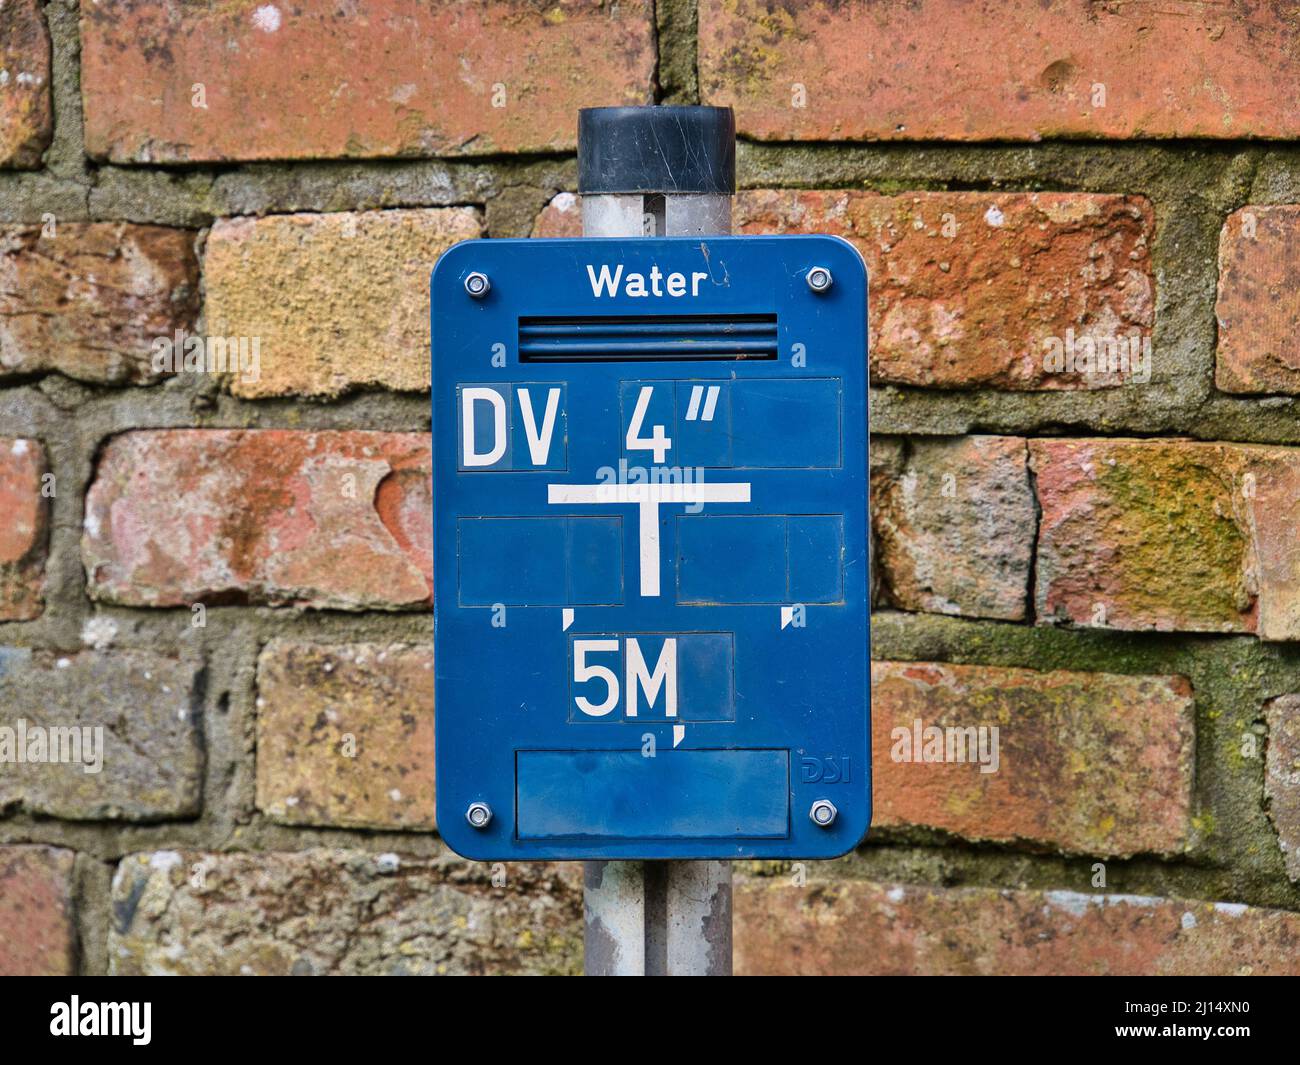 A blue, rectangular sign on a metal post indicates the location of buried water supply pipes. Stock Photo